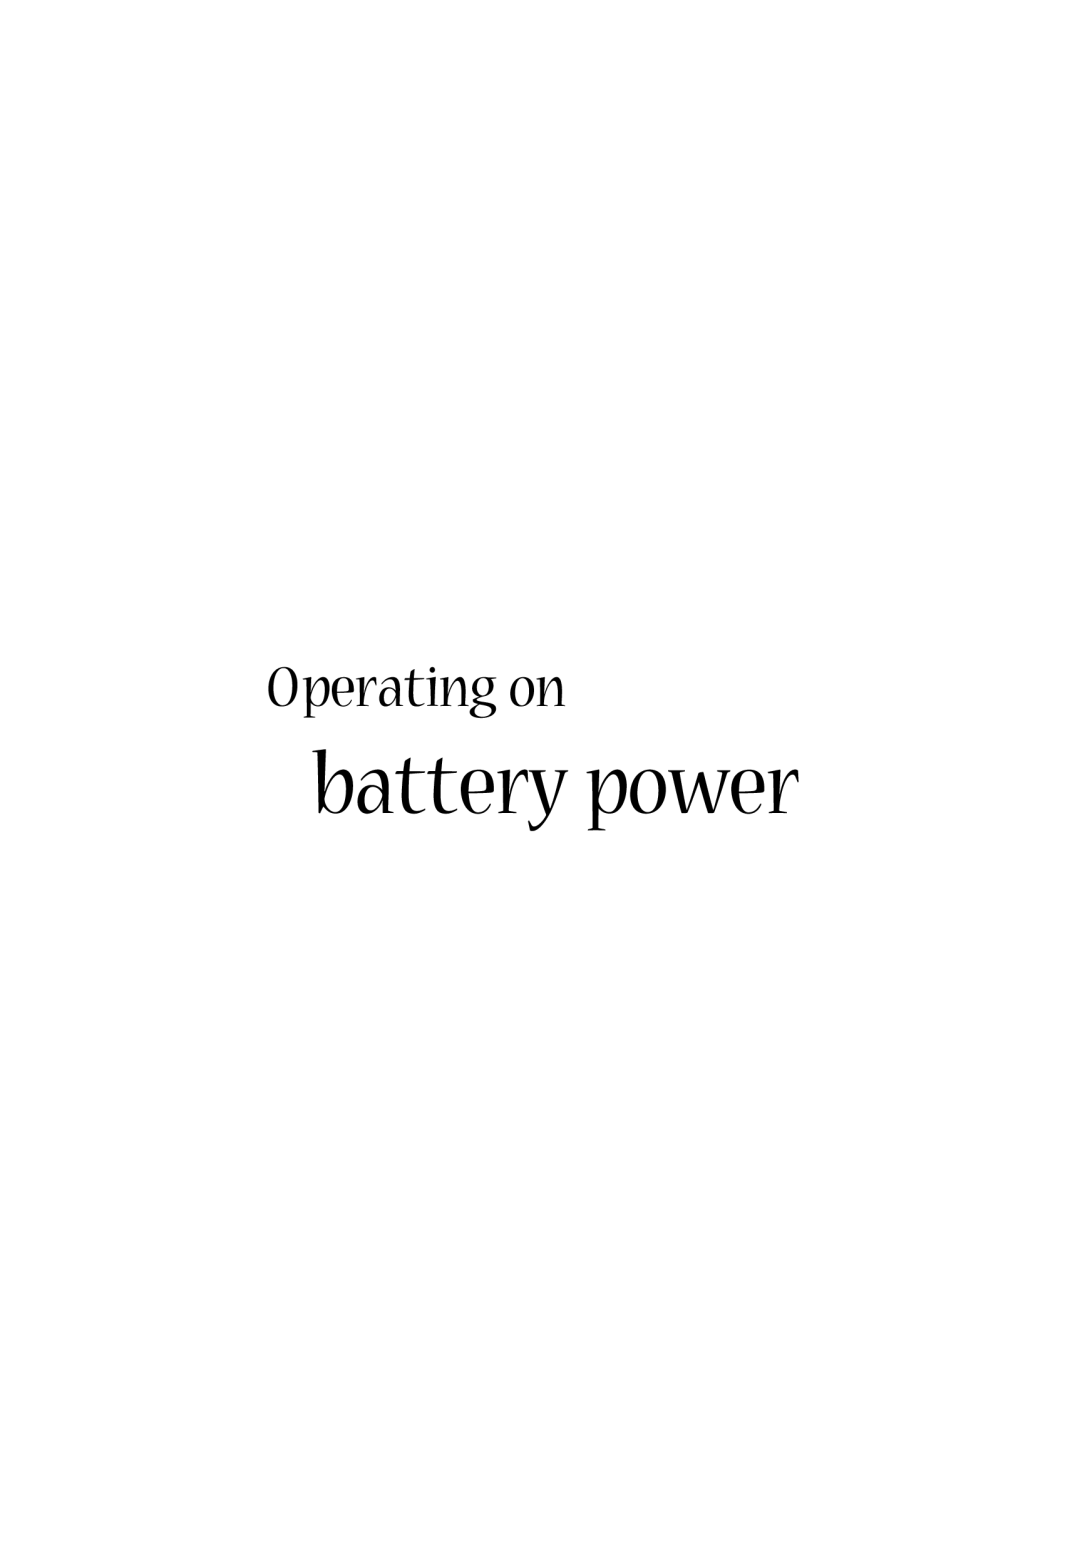 Acer 1360 manual battery power, Operating on 